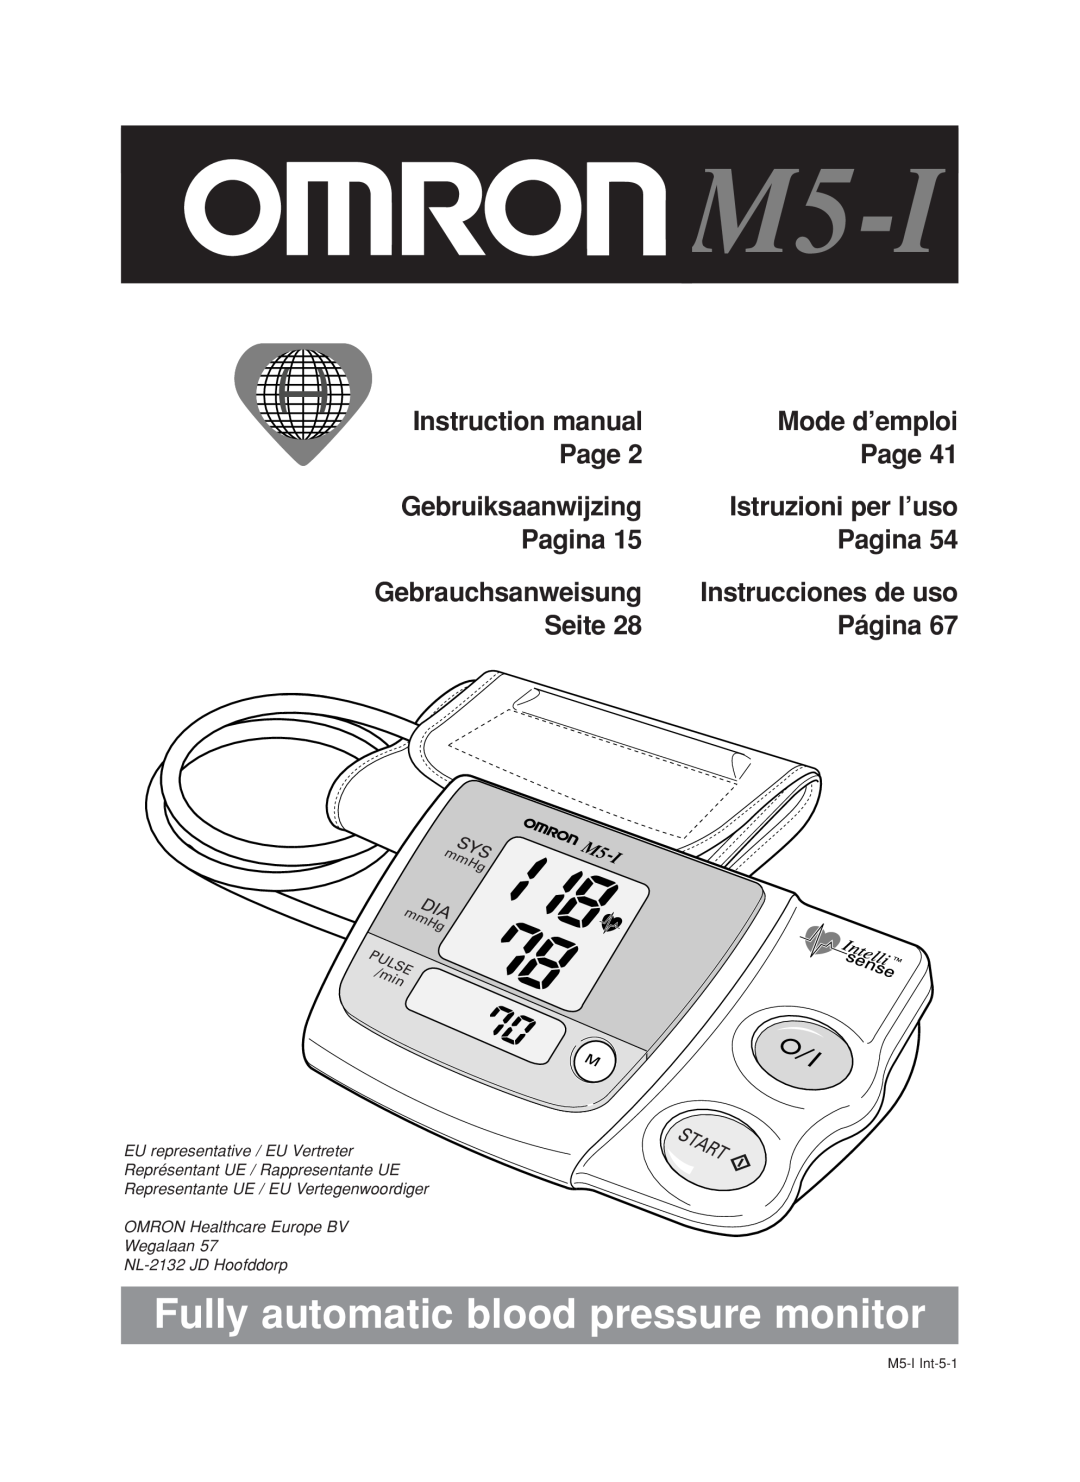 Omron M5-I instruction manual Fully automatic blood pressure monitor 